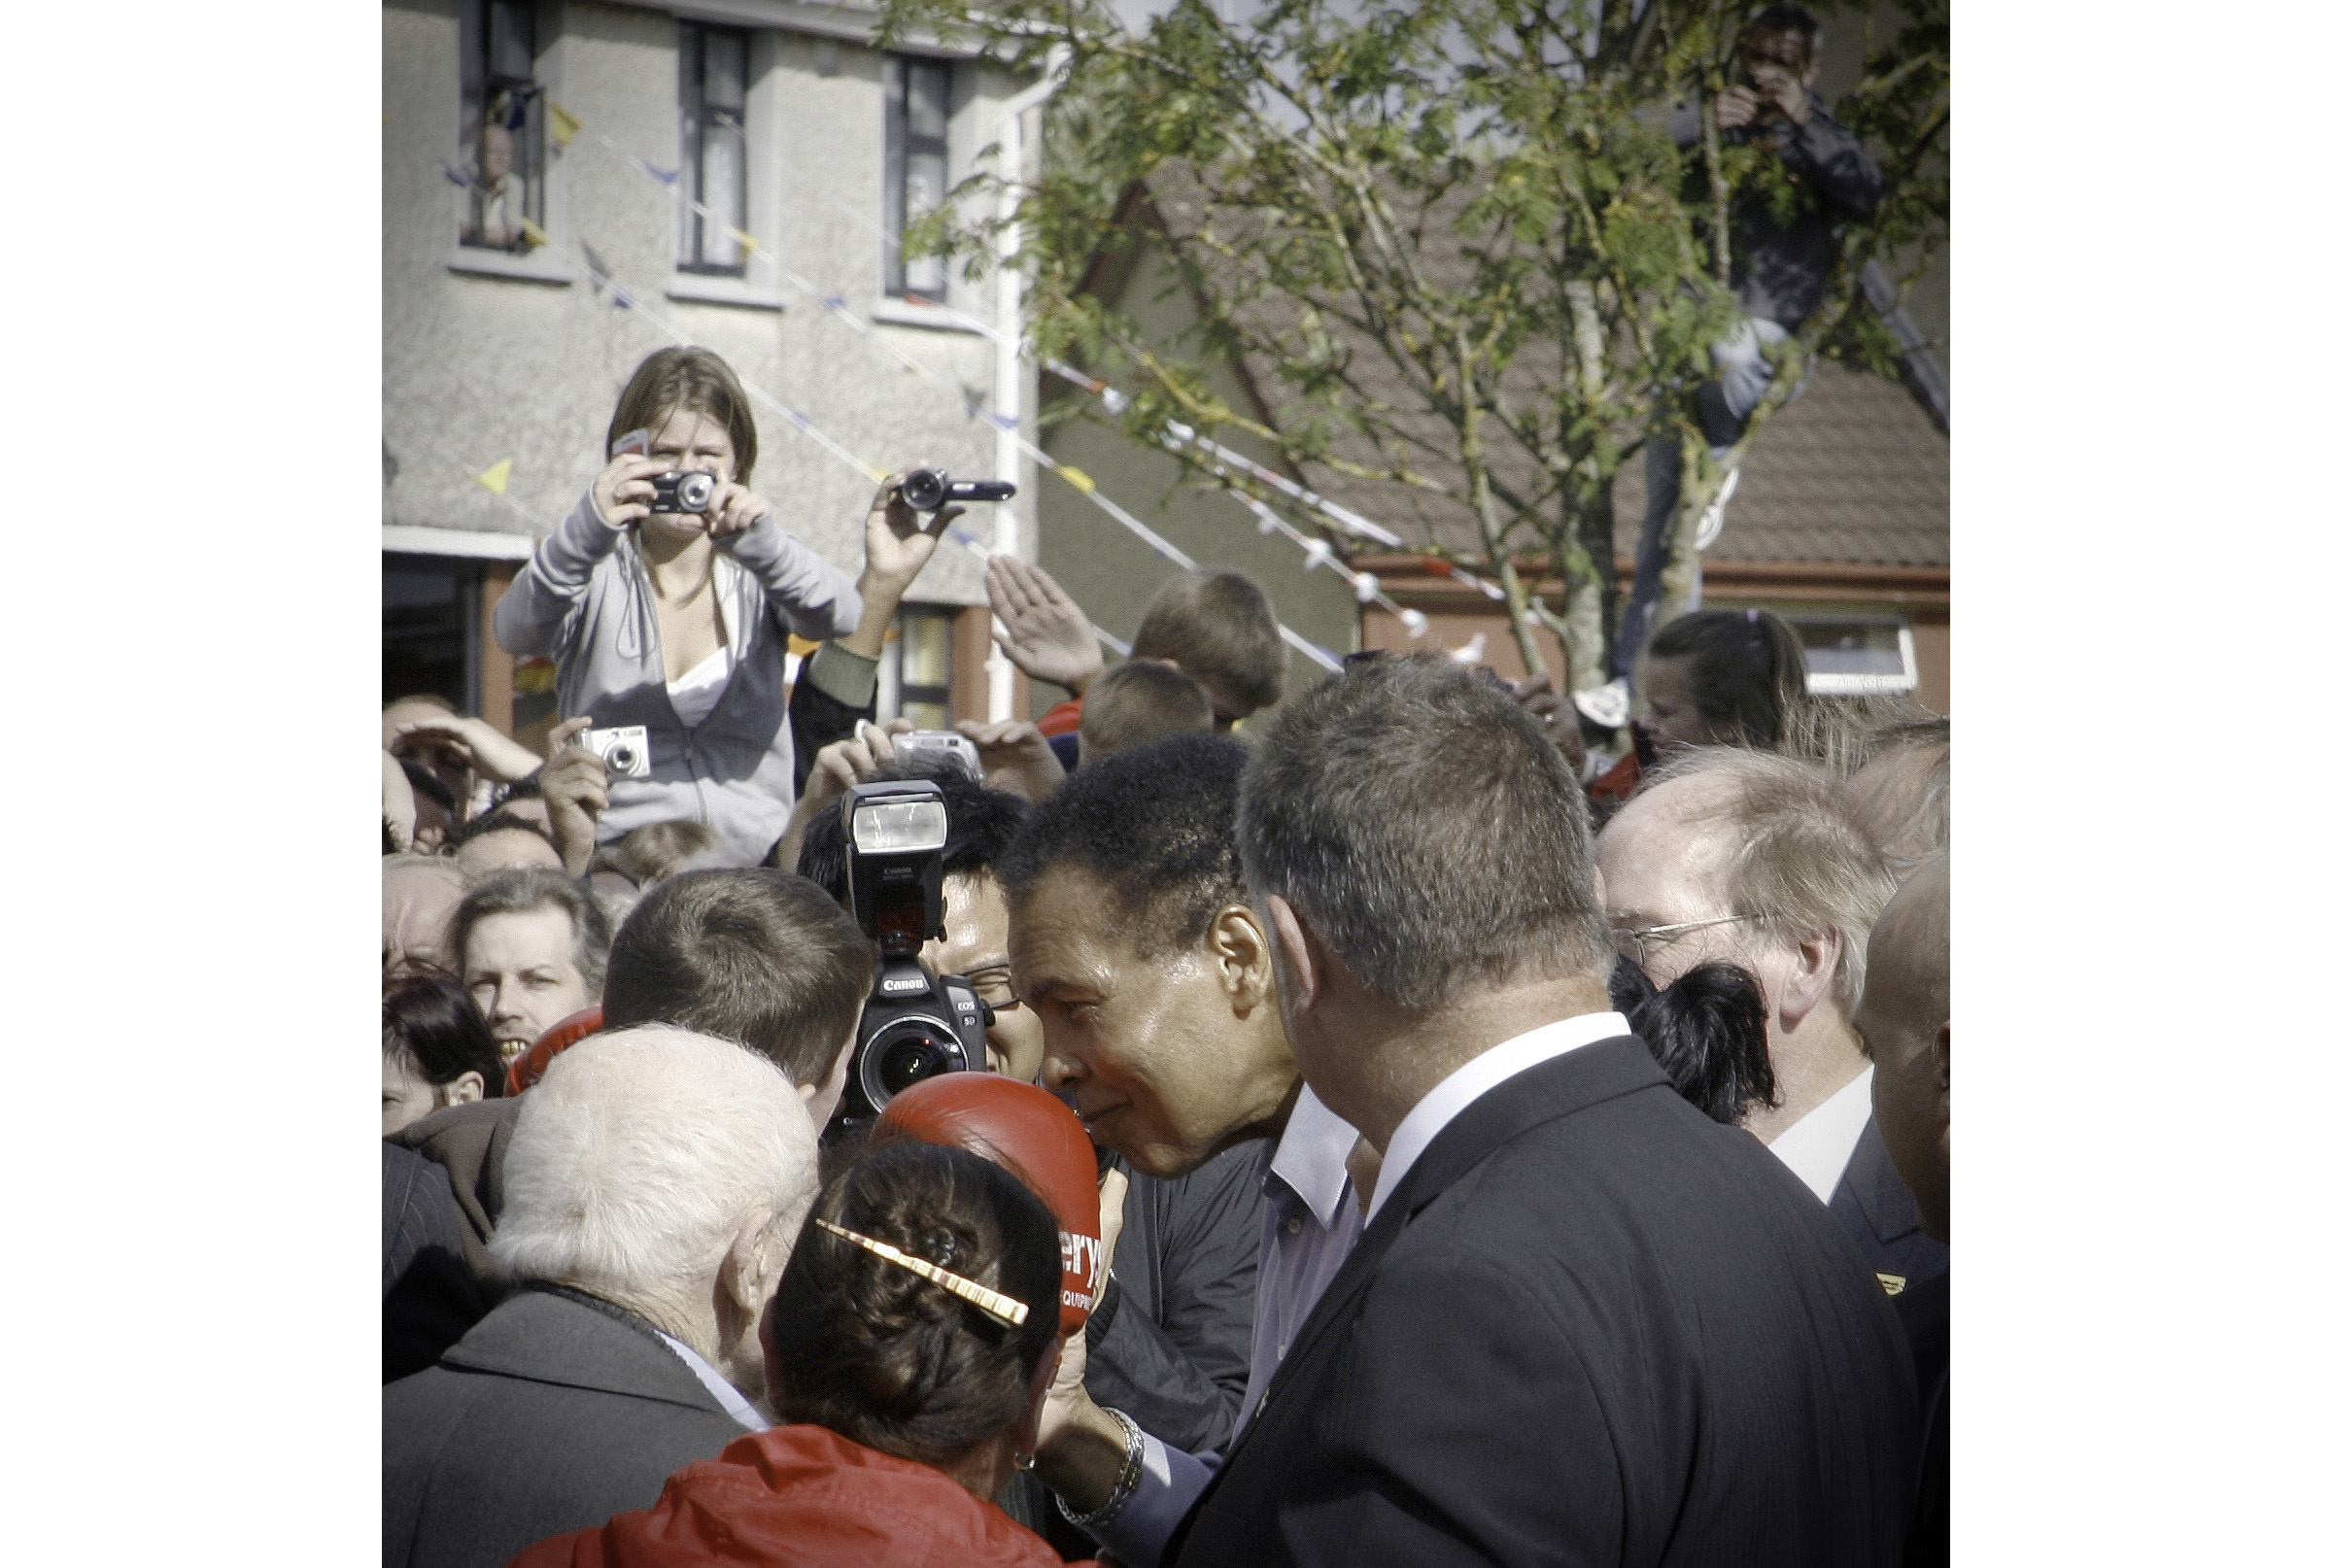 Mohammed Ali walks through the streets of Ennis. Photo courtesy of the author.